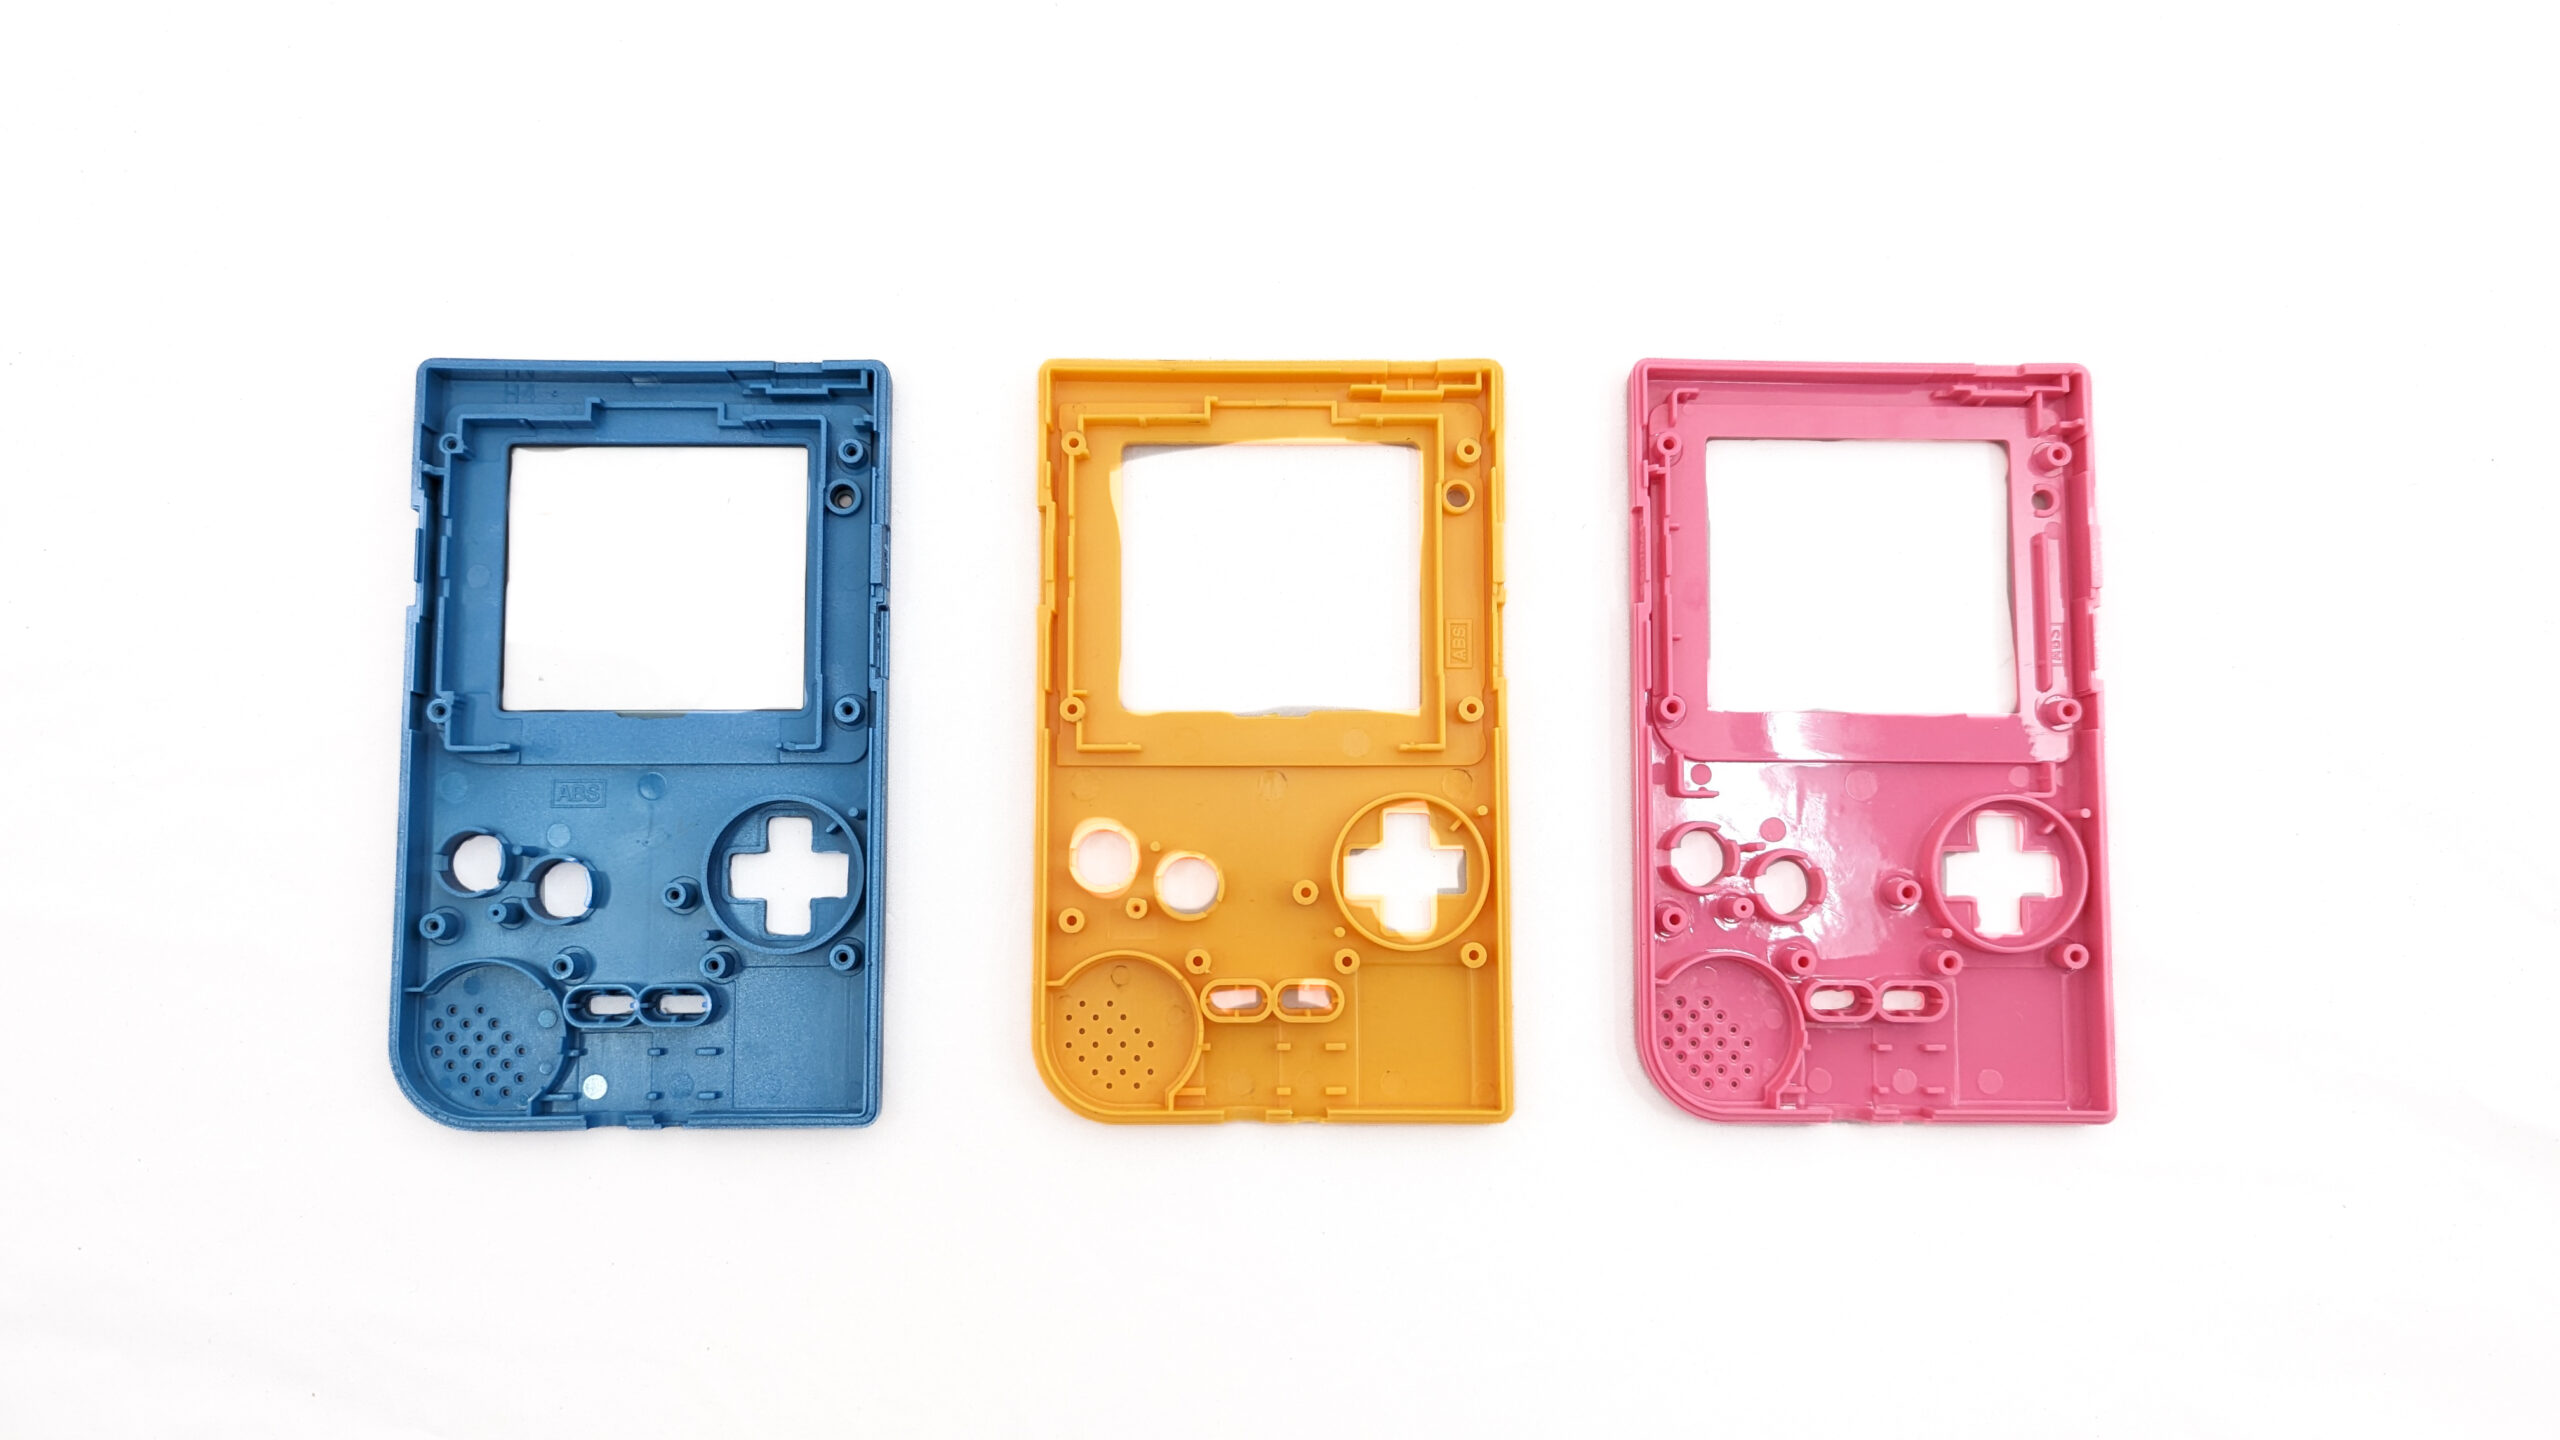 Three game boy shells in a row: blue, yellow, and pink.